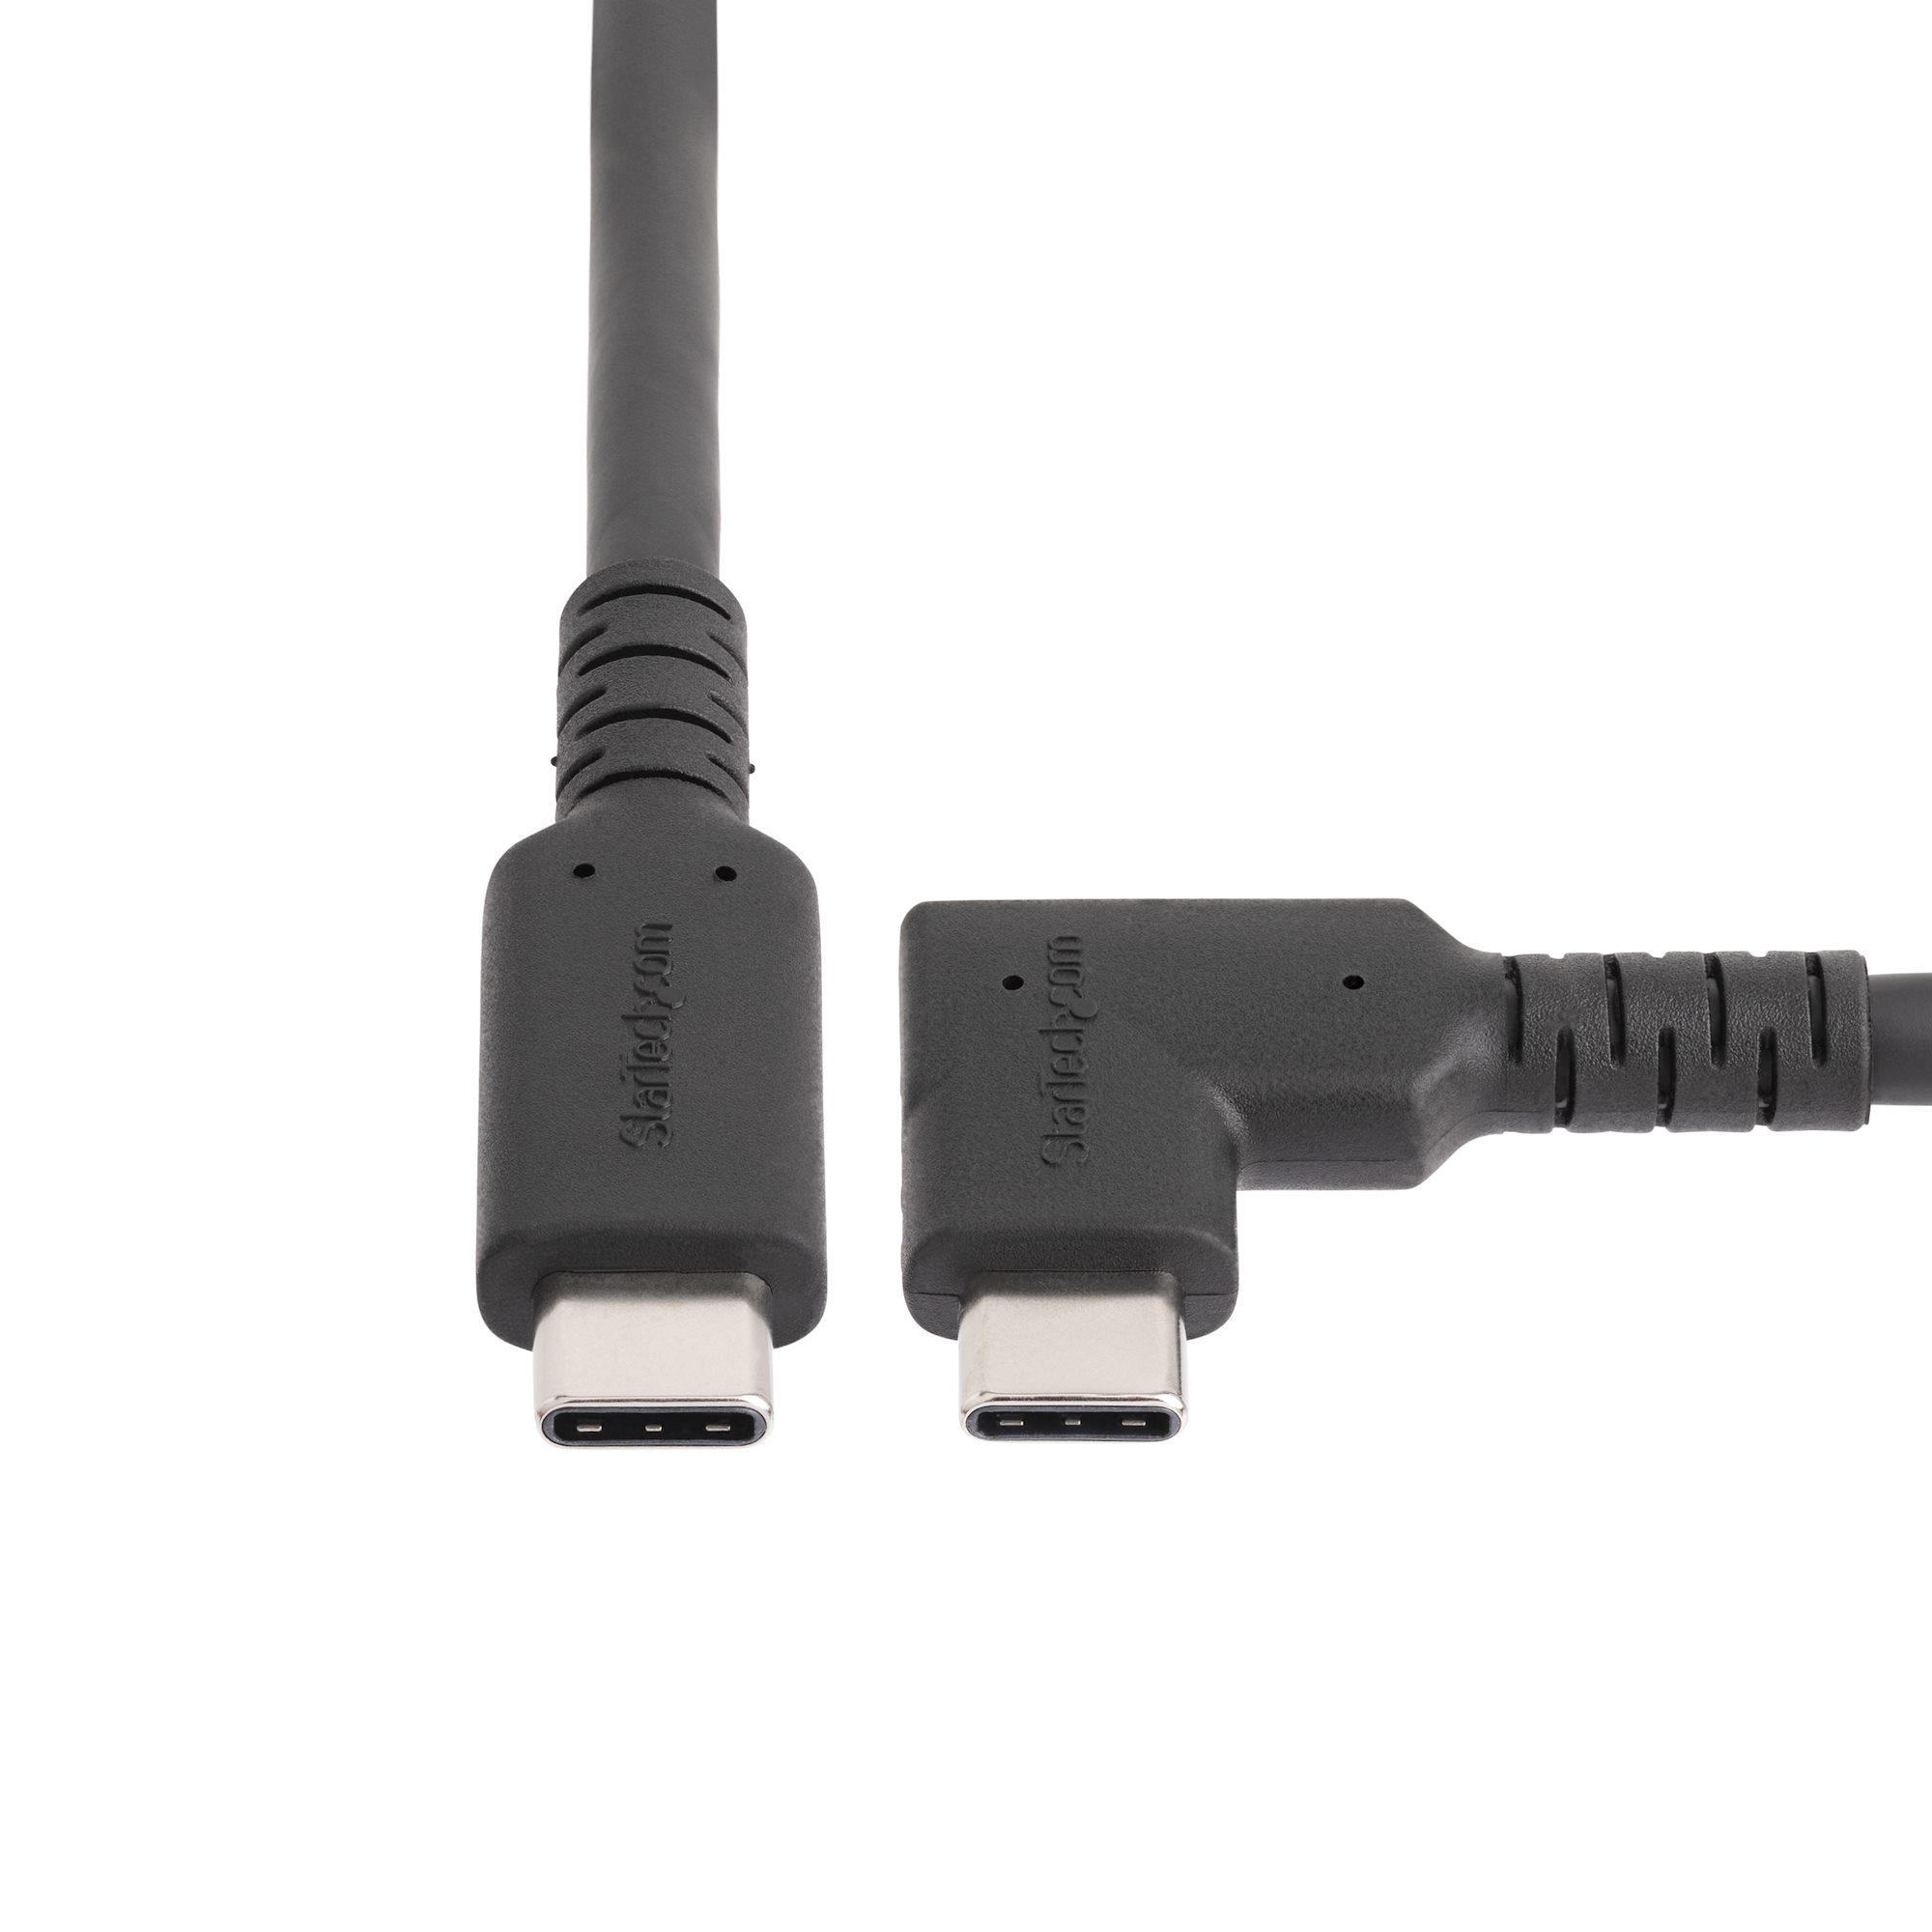 Right Angle USB Type C Adapter - USB 3.1 Gen 4 Compatible : ID